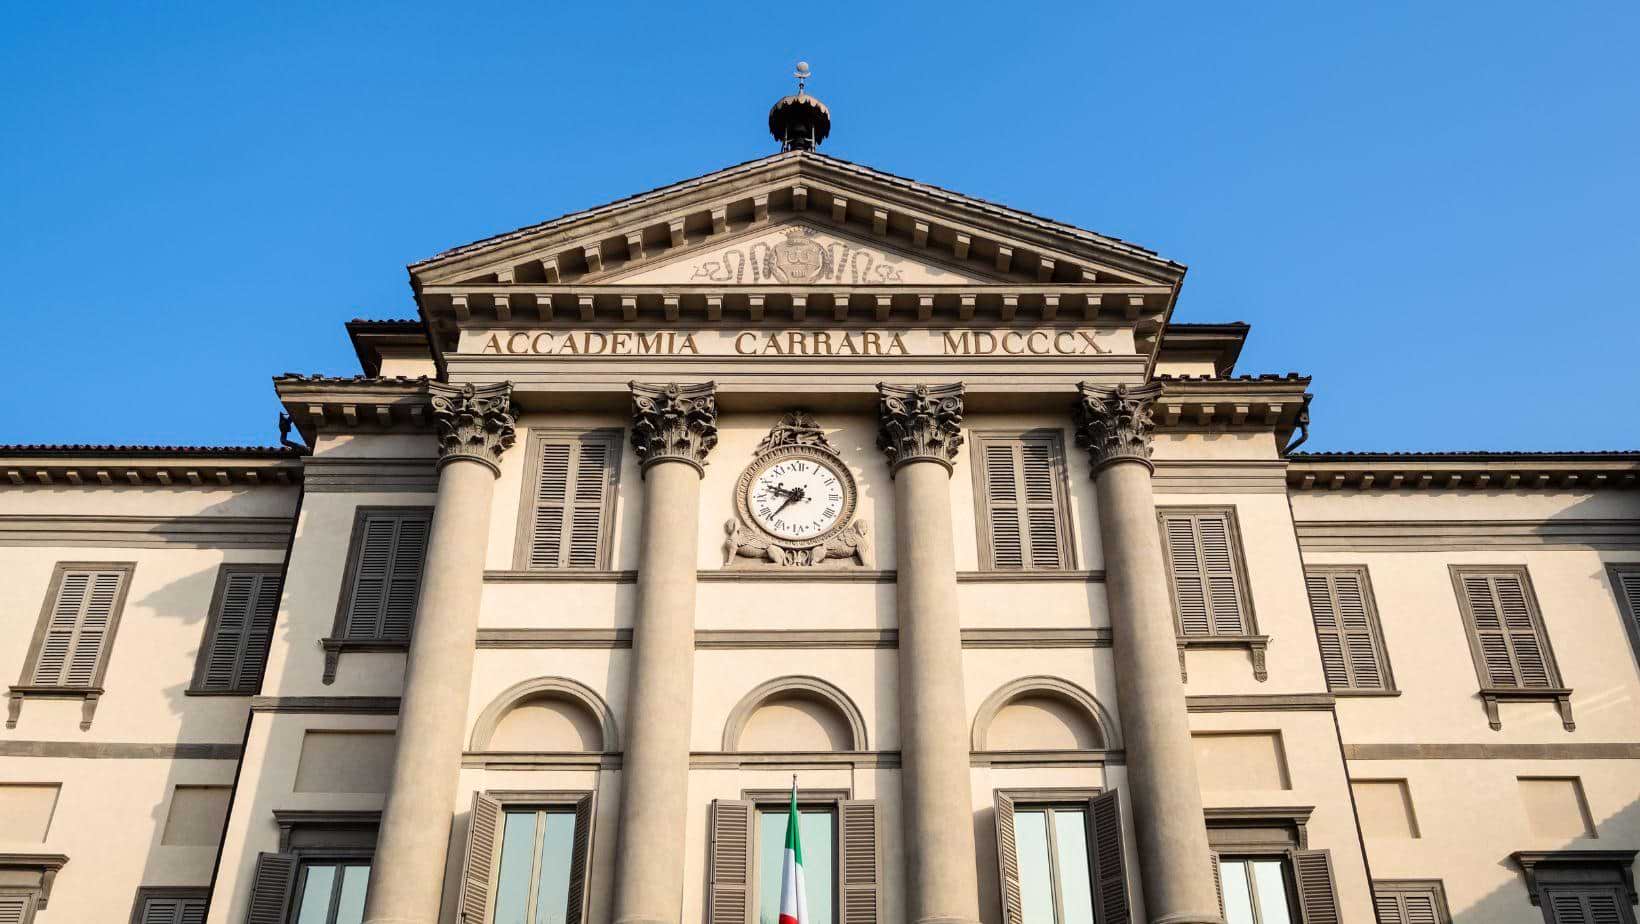 Museums In Italy: Accademia Gallery